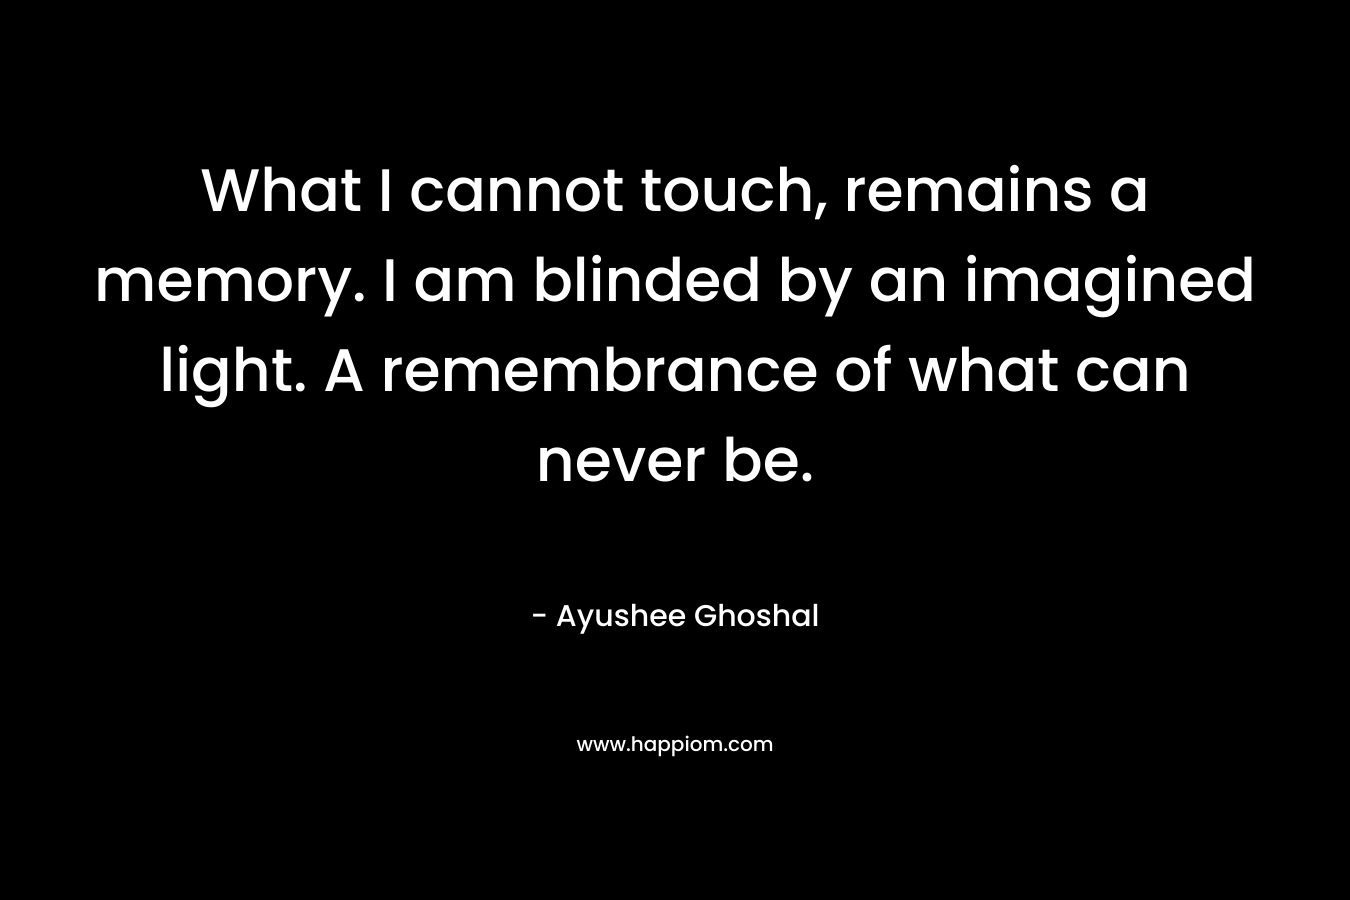 What I cannot touch, remains a memory. I am blinded by an imagined light. A remembrance of what can never be. – Ayushee Ghoshal